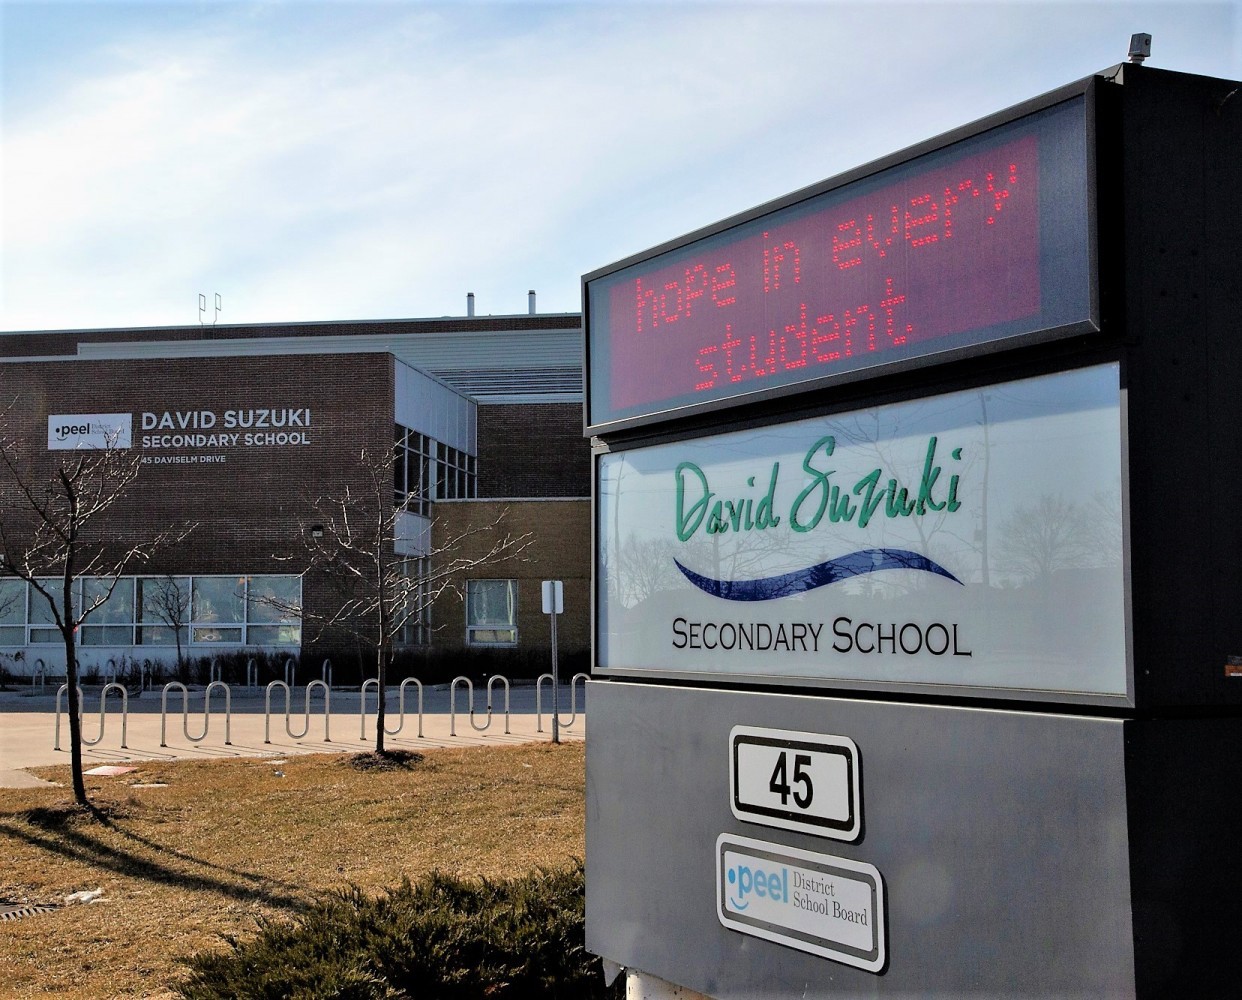 PDSB won’t disclose finances, creating uncertainty around board’s ability to deal with pandemic 